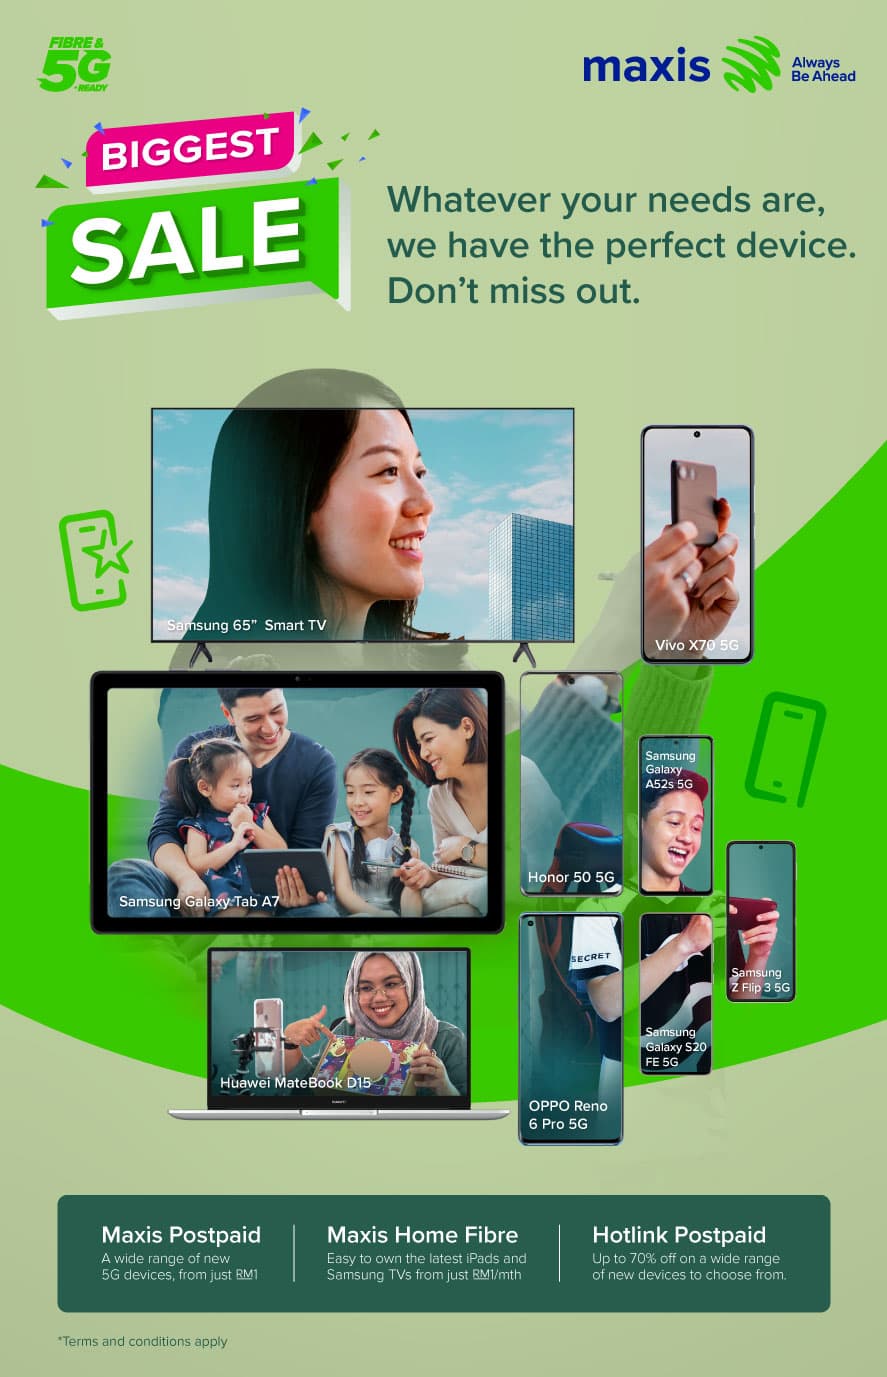 Maxis Biggest Sale back with the widest range of devices and irresistible promos